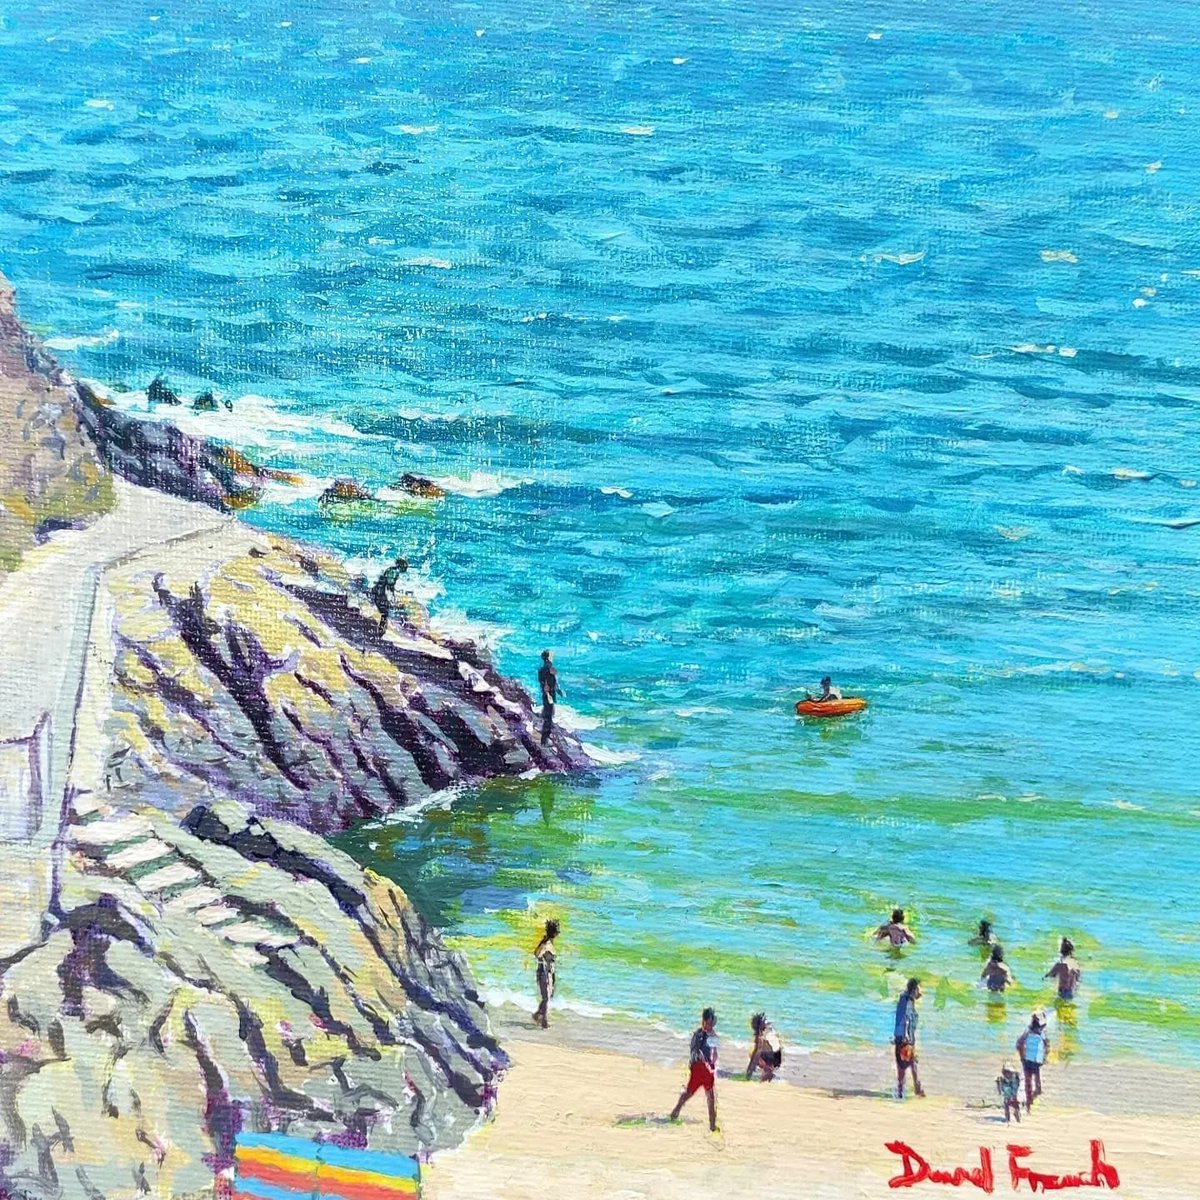 'Porthgwidden Corner'

Jumping in the sea and splashing in the shallows... summer's arrived!

20 x 20cm acrylic on canvas board (29x29 approx framed size)

New paintings of St Ives are now available at the Arthouse Gallery Island Road St Ives
thearthouses.com